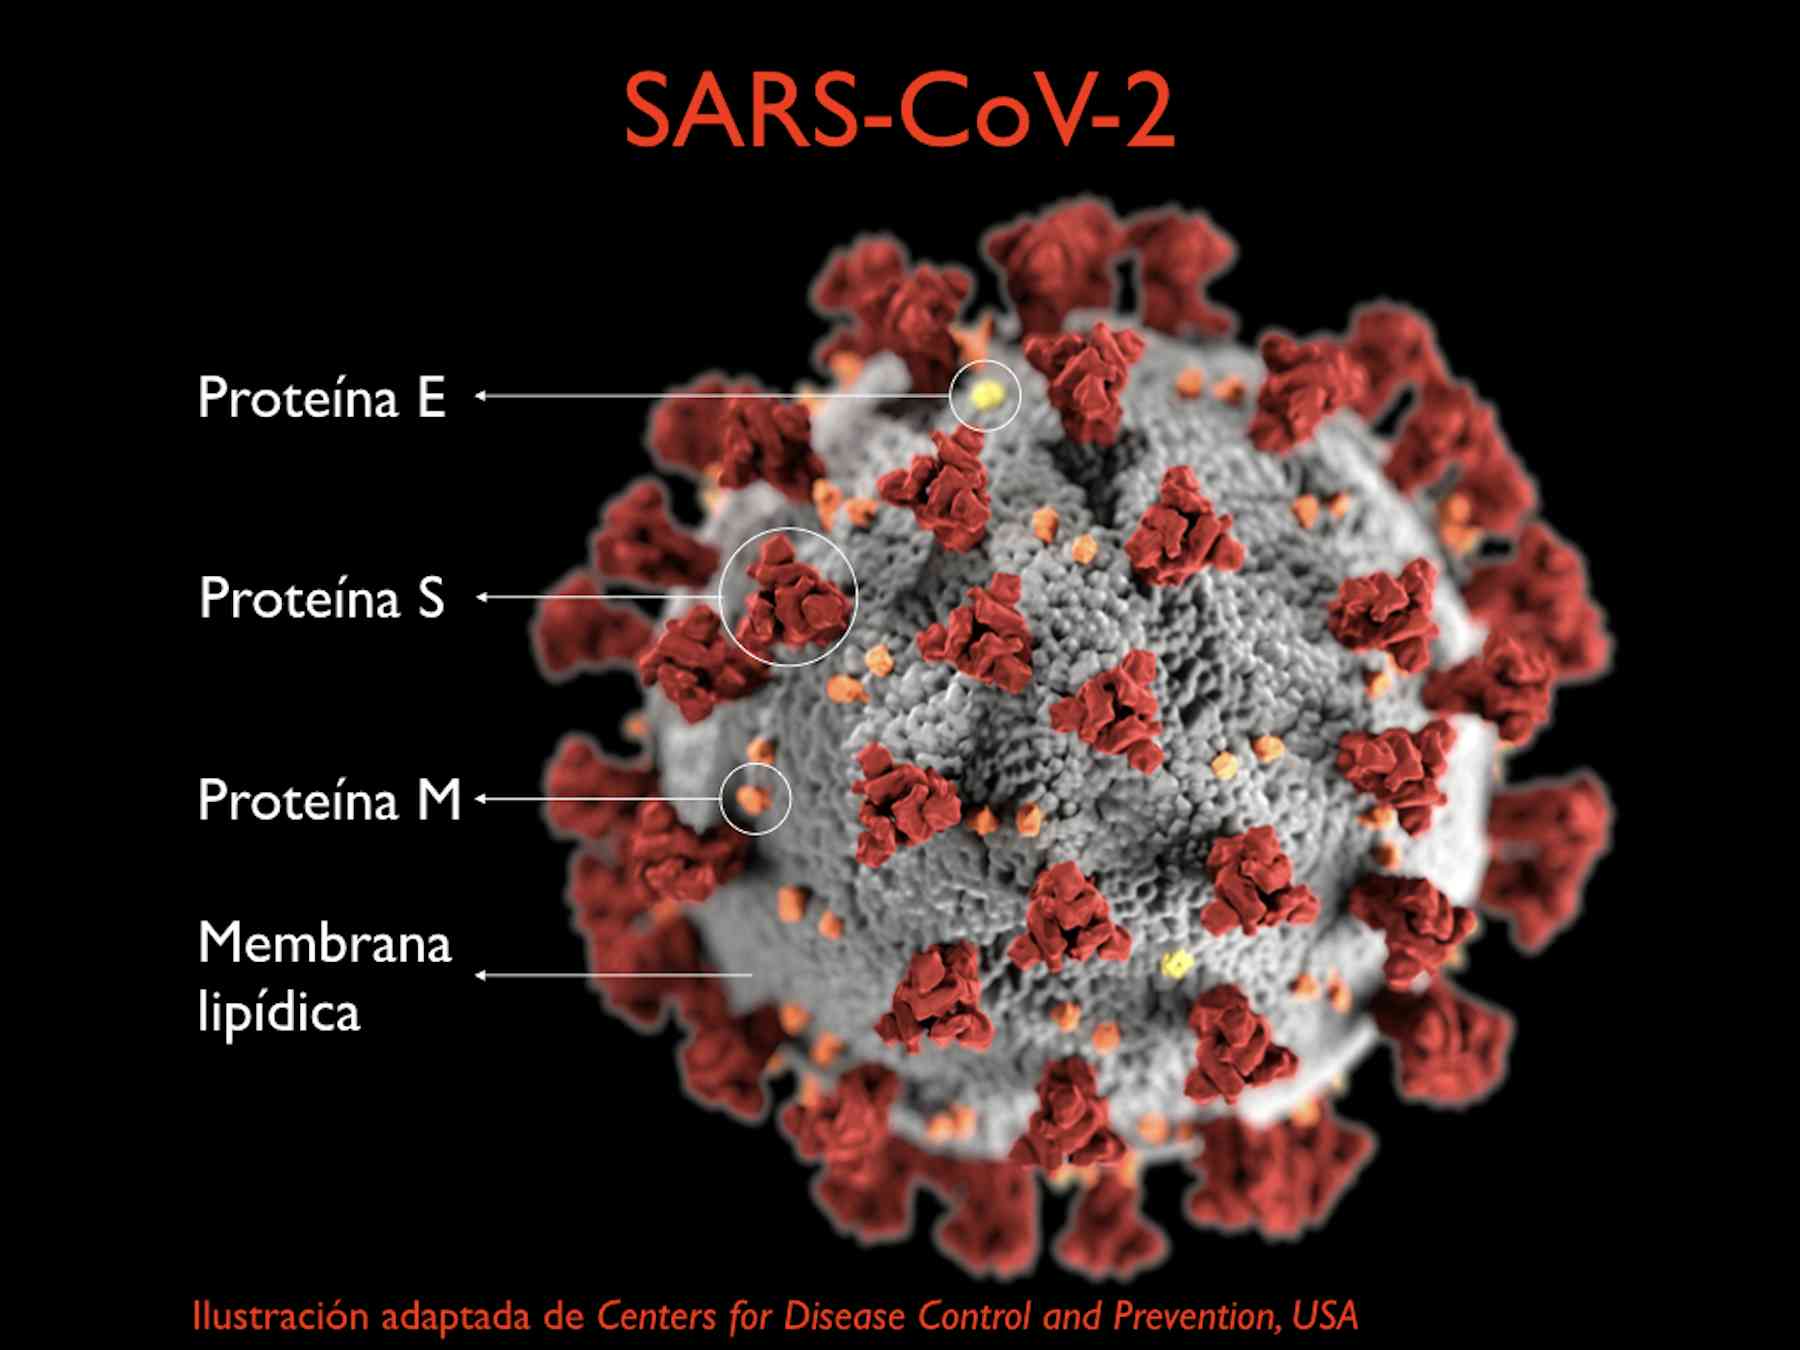 coronavirus-crisis-will-it-end-by-summer-experts-are-at-odds-what-we